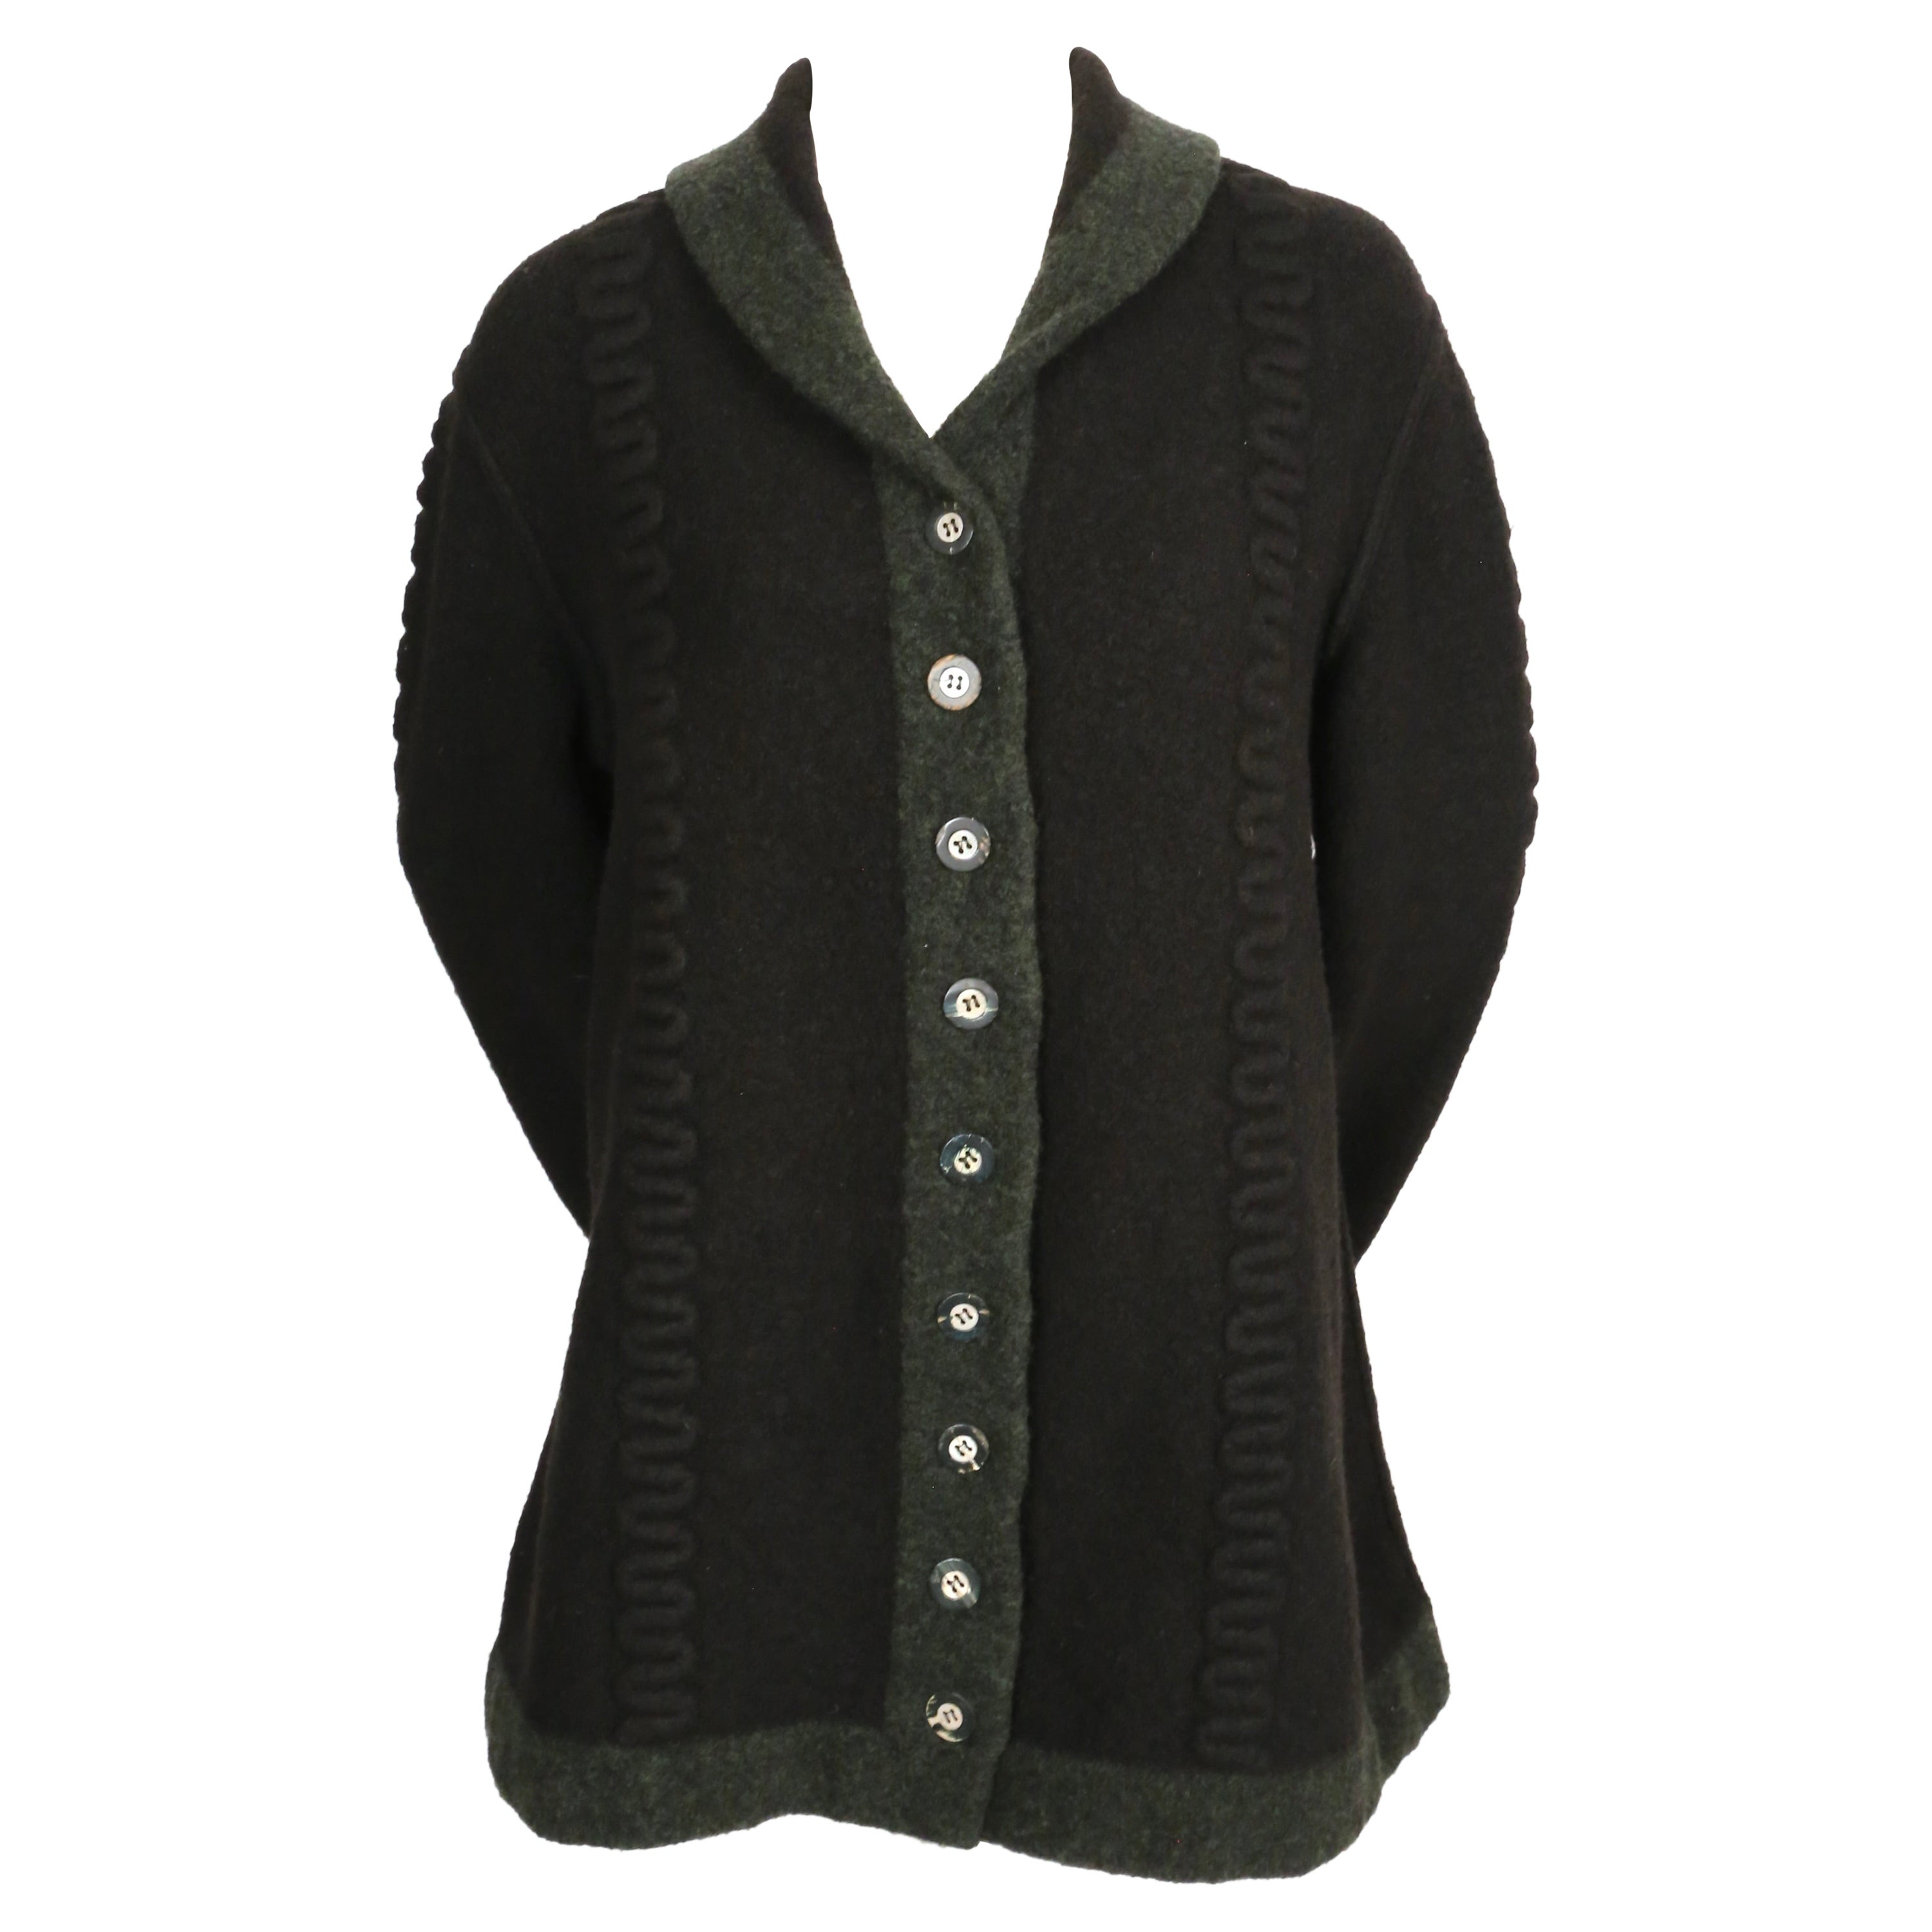 1994 AZZEDINE ALAIA deep navy blue and green oversized wool cardigan sweater For Sale